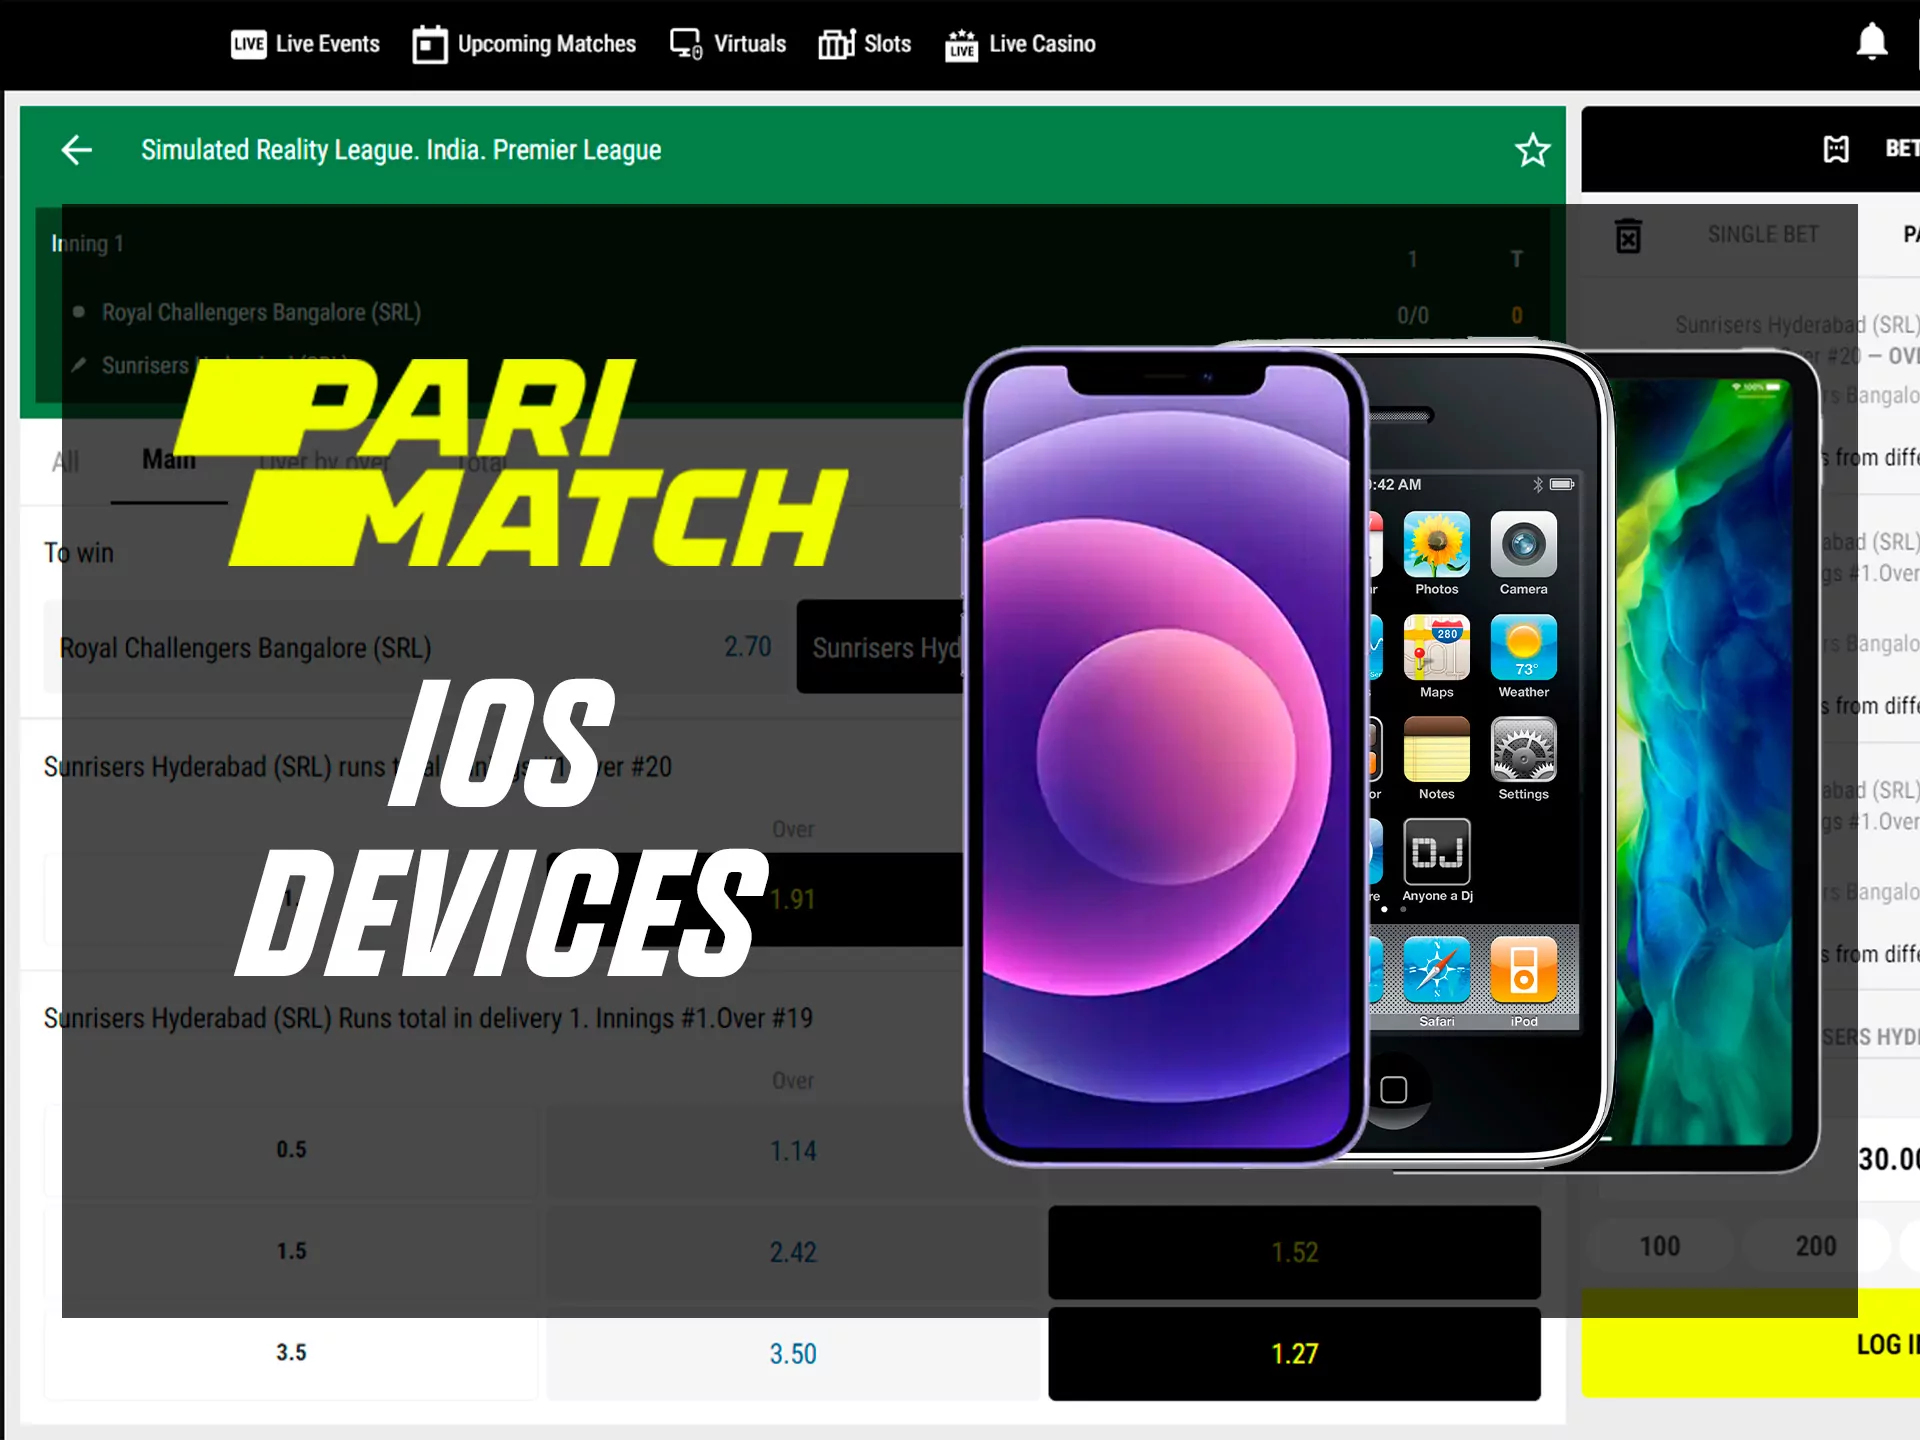 You can install the Parimatch mobile app only if your iPhone is not under 4s model.